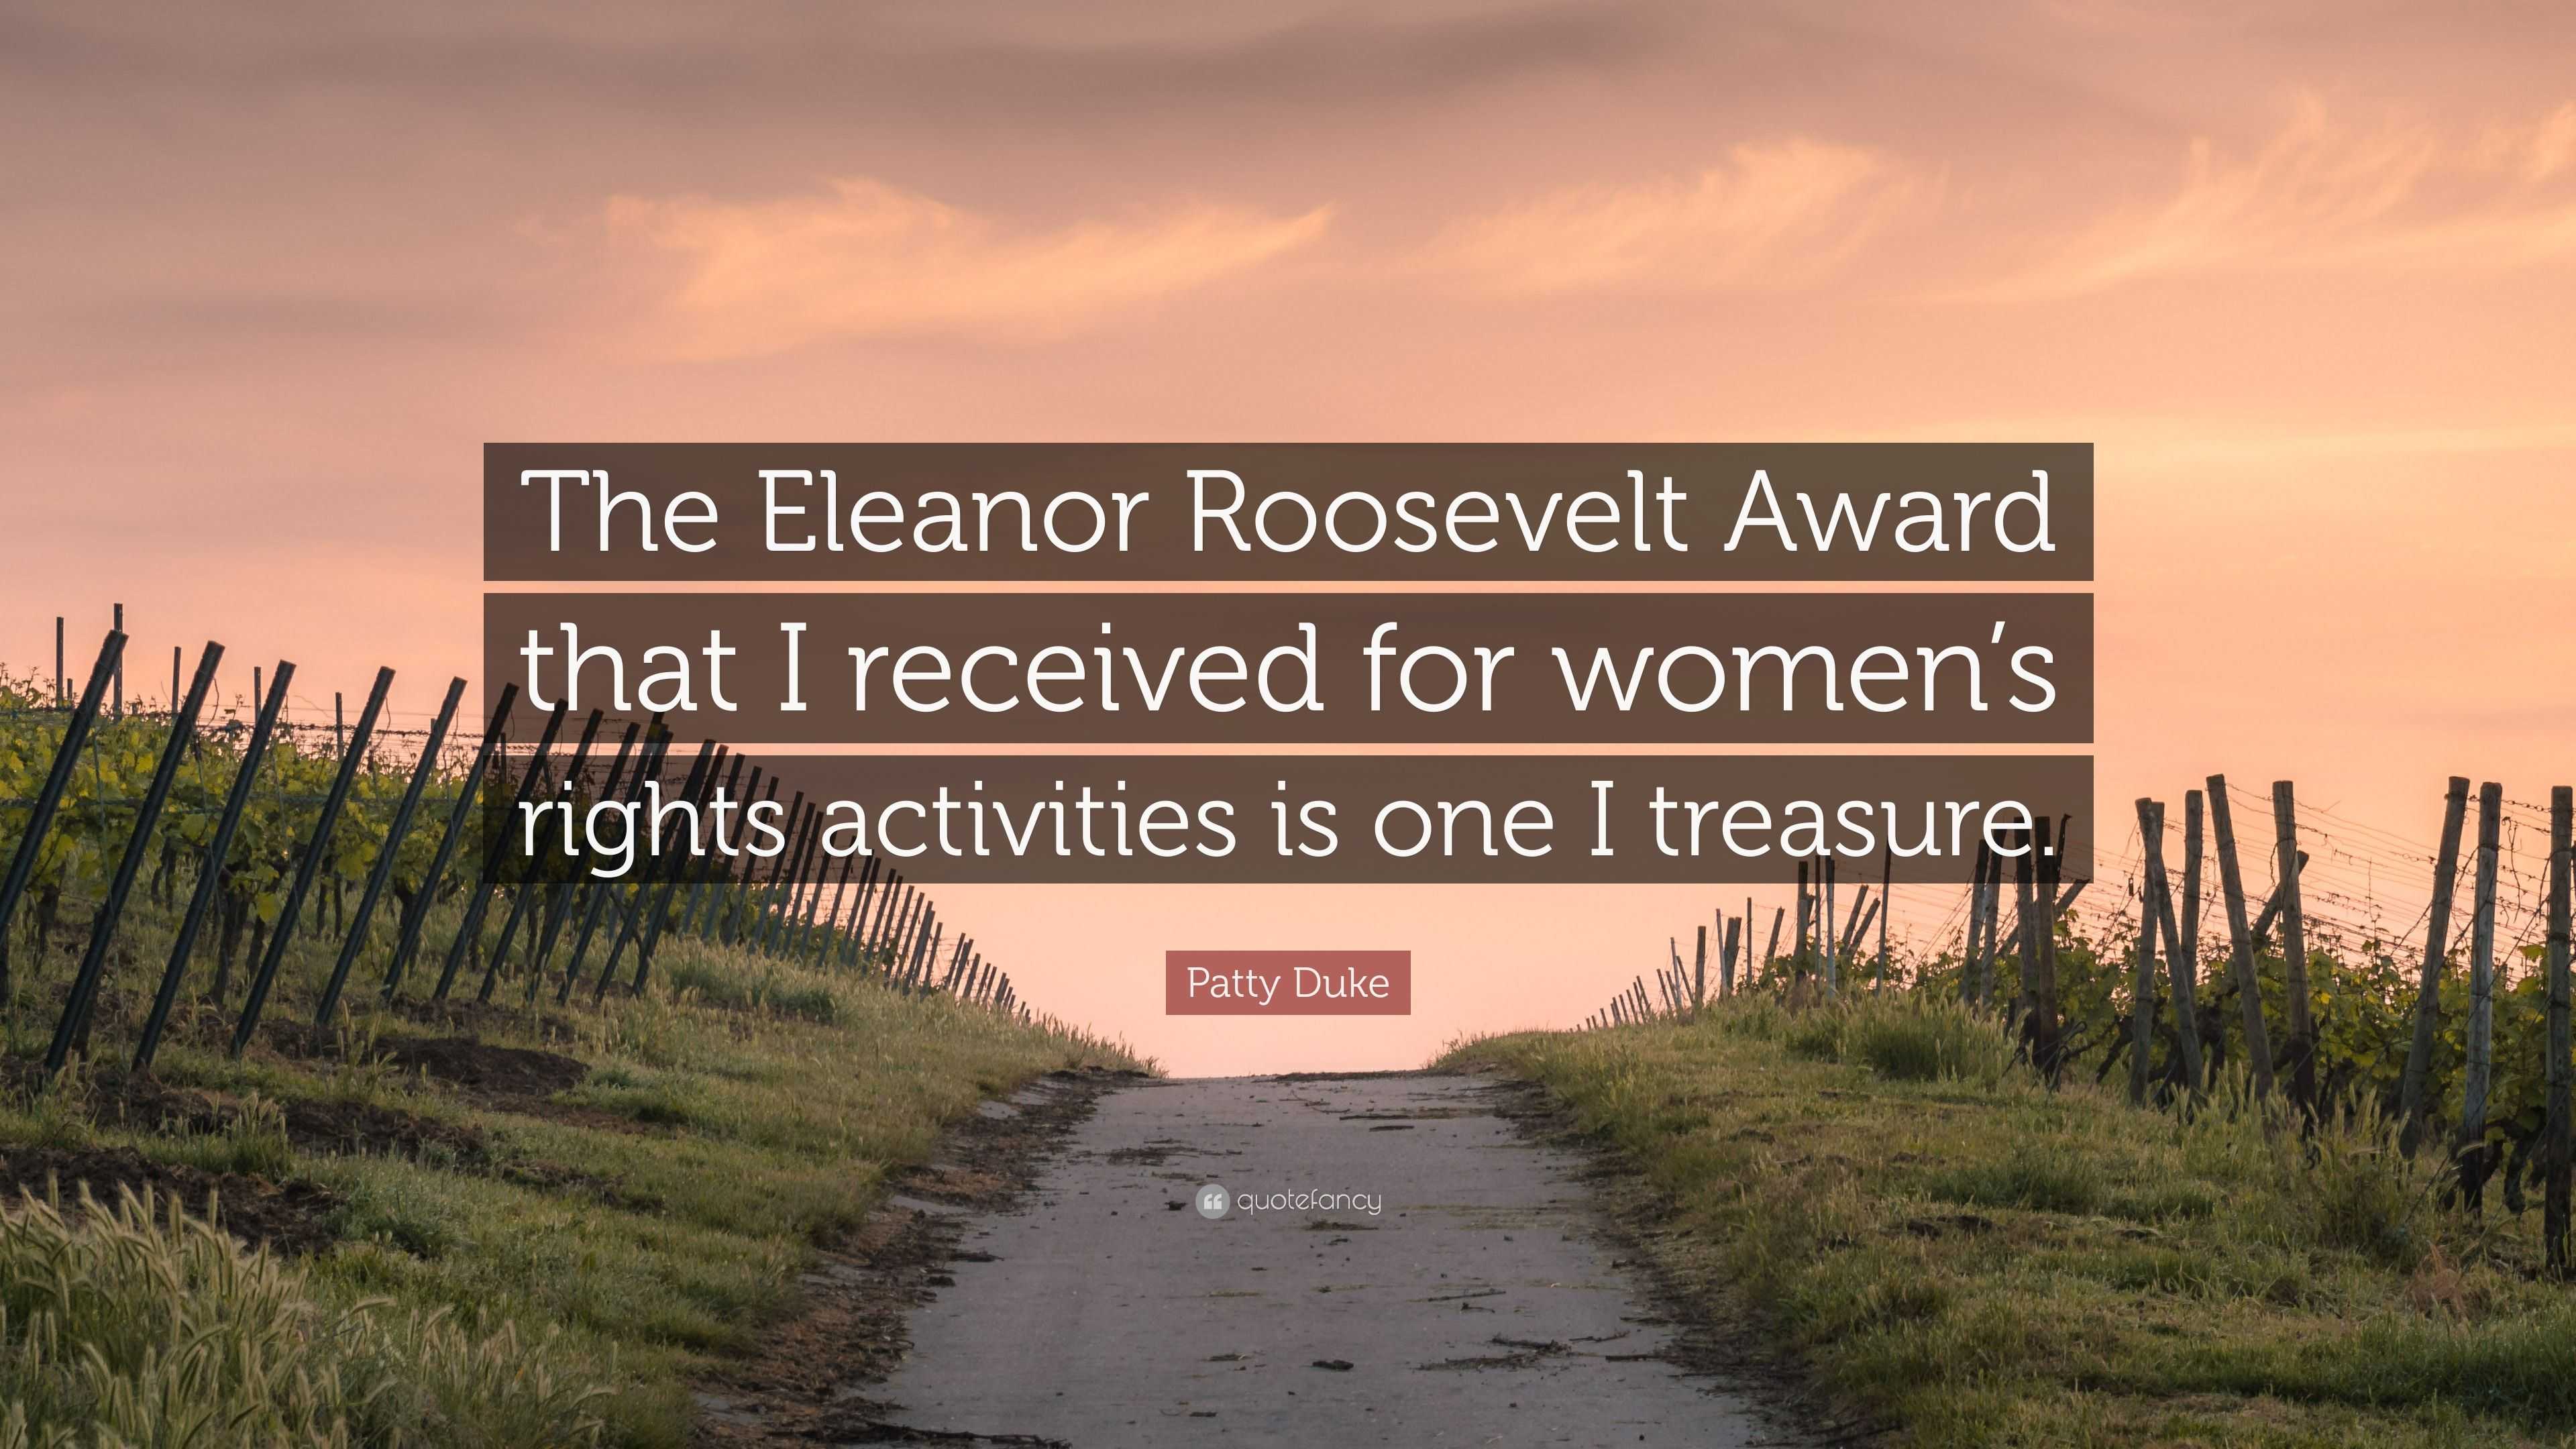 Patty Duke Quote: “The Eleanor Roosevelt Award that I received for